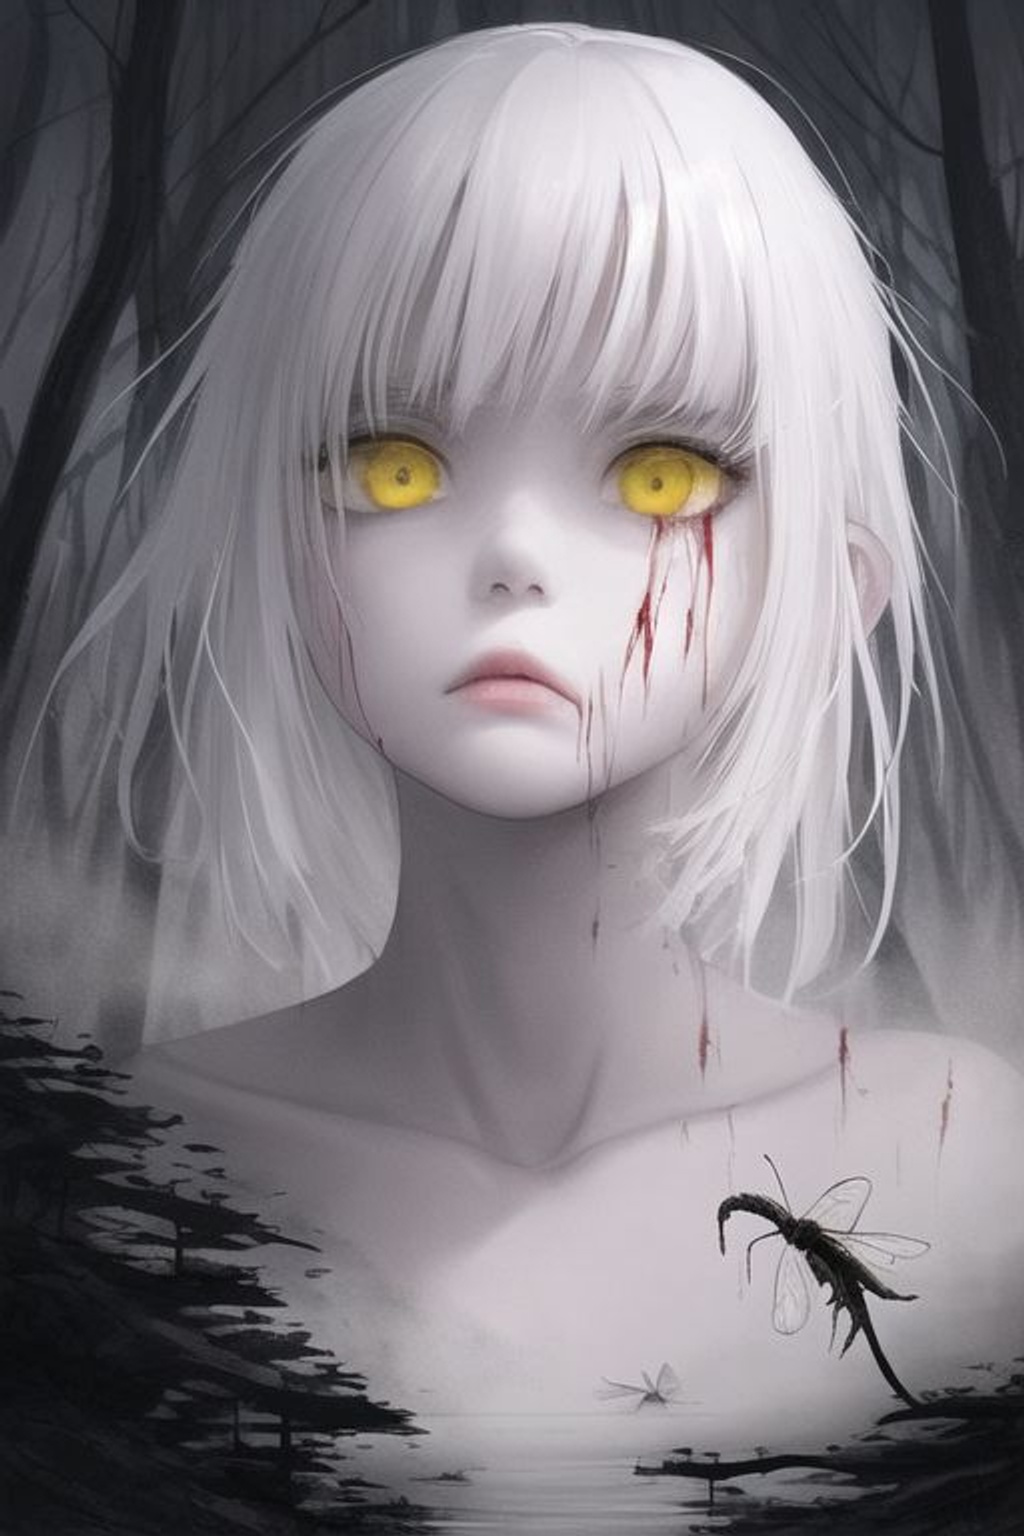 Prompt: SamDoesArt, kentaro_miura, 1girl, white_hair, yellow_eyes, detailed_face, mist, fog, dead_animals, bugs, insects, slight_rain, dark_atmosphere, castle, dark_tower, monsters, river, forest, blood, blood_flowing, dirty_area, torn_clothing, torn_robes, looking_at_viewer, slightly_parted_lips, corpses,